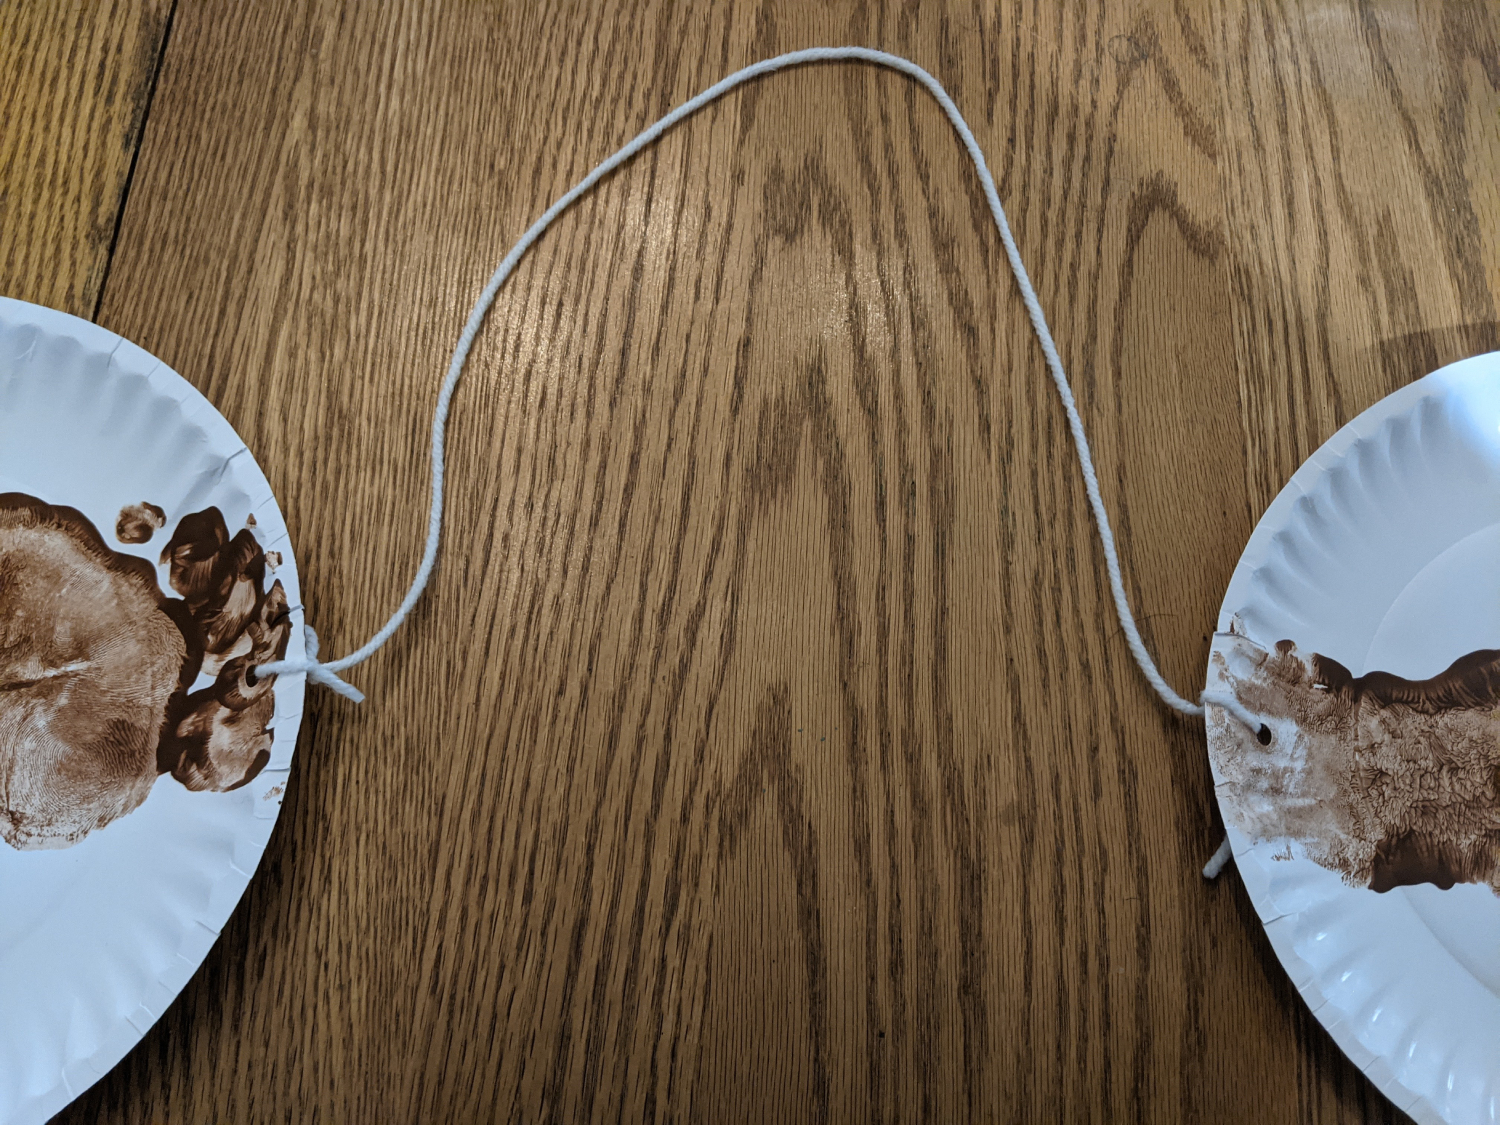 Two paper plates with painted footprints are tied together with a bit of string